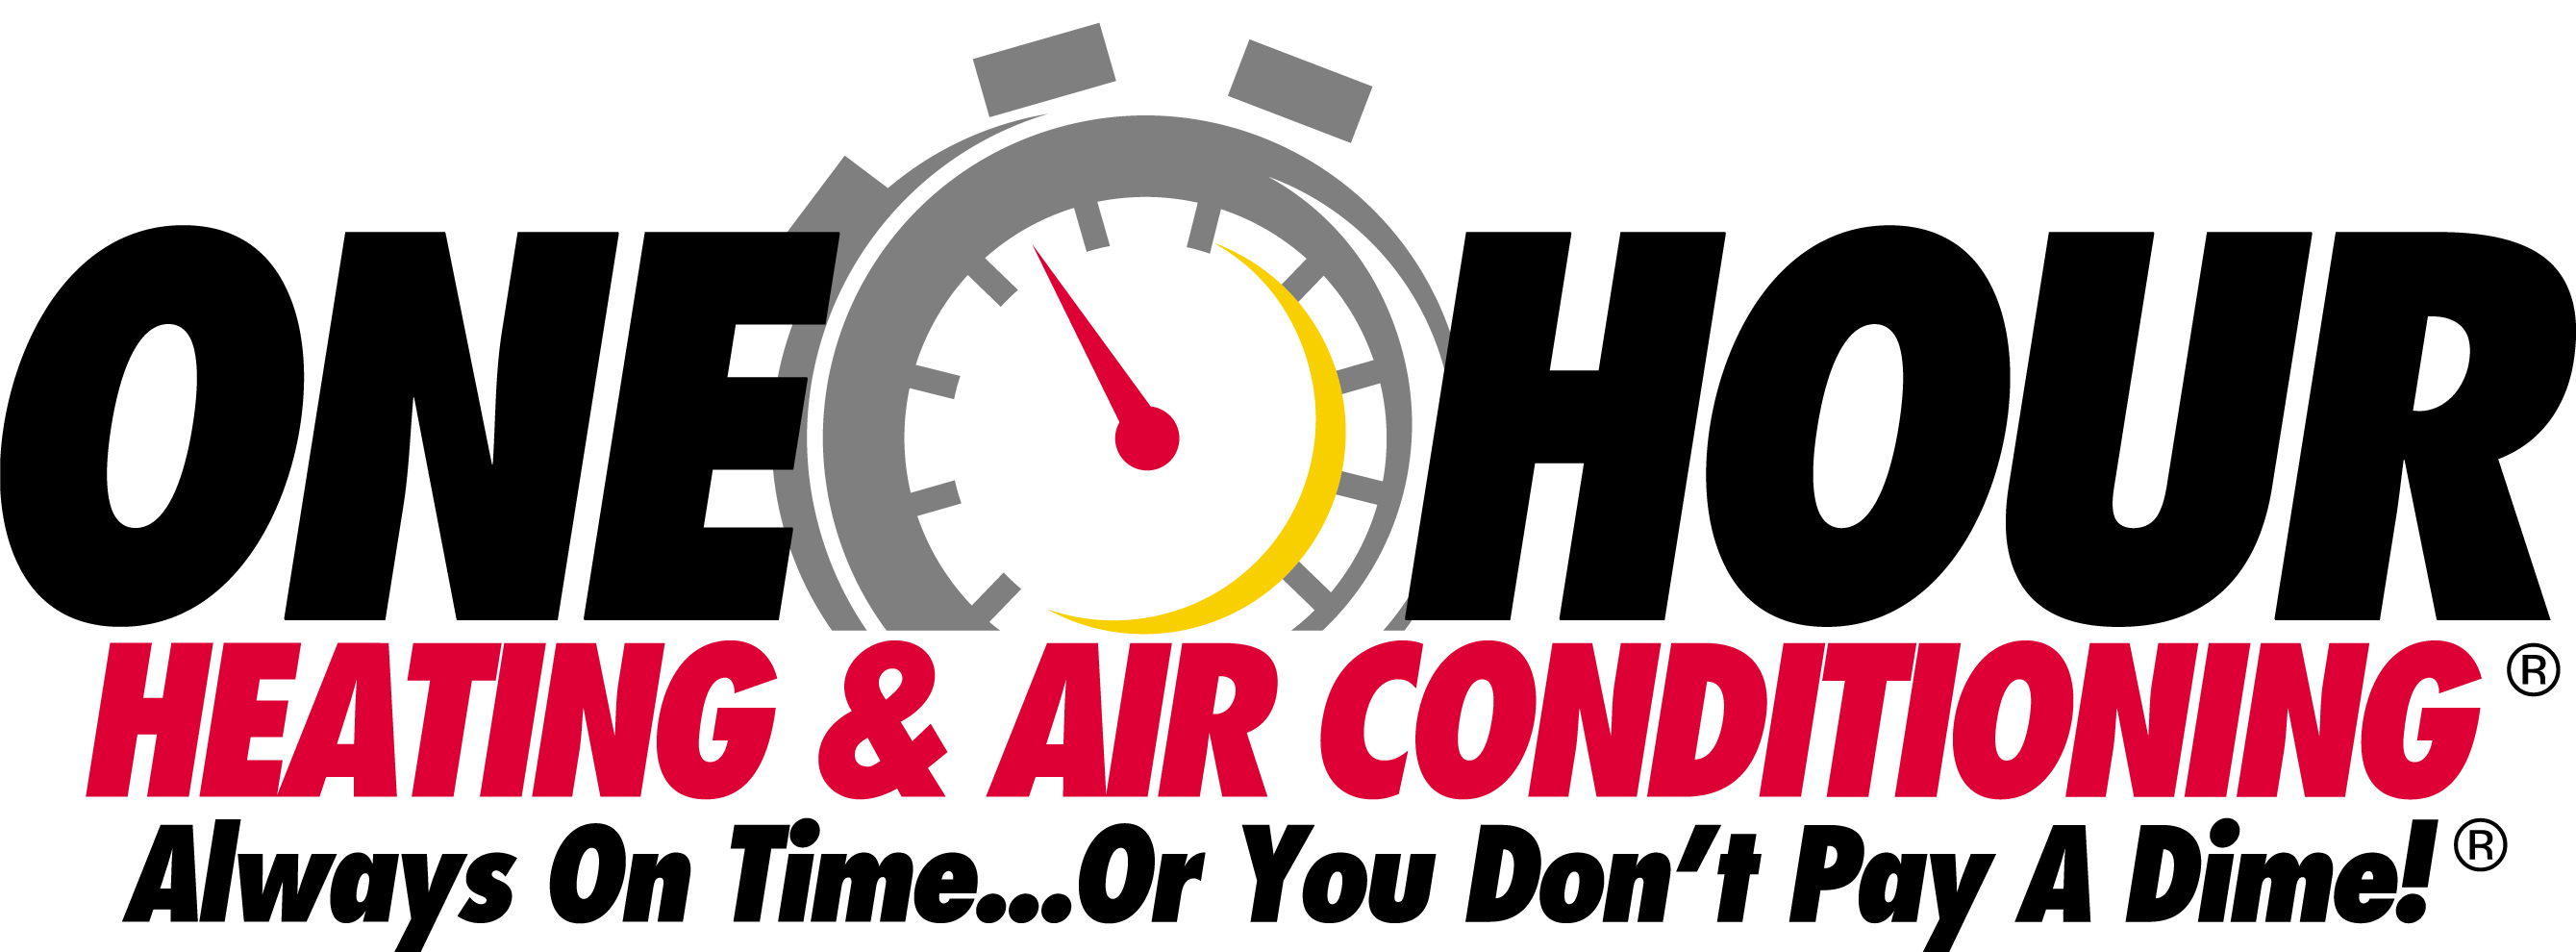 One Hour Heating & Air Conditioning - Denver Logo